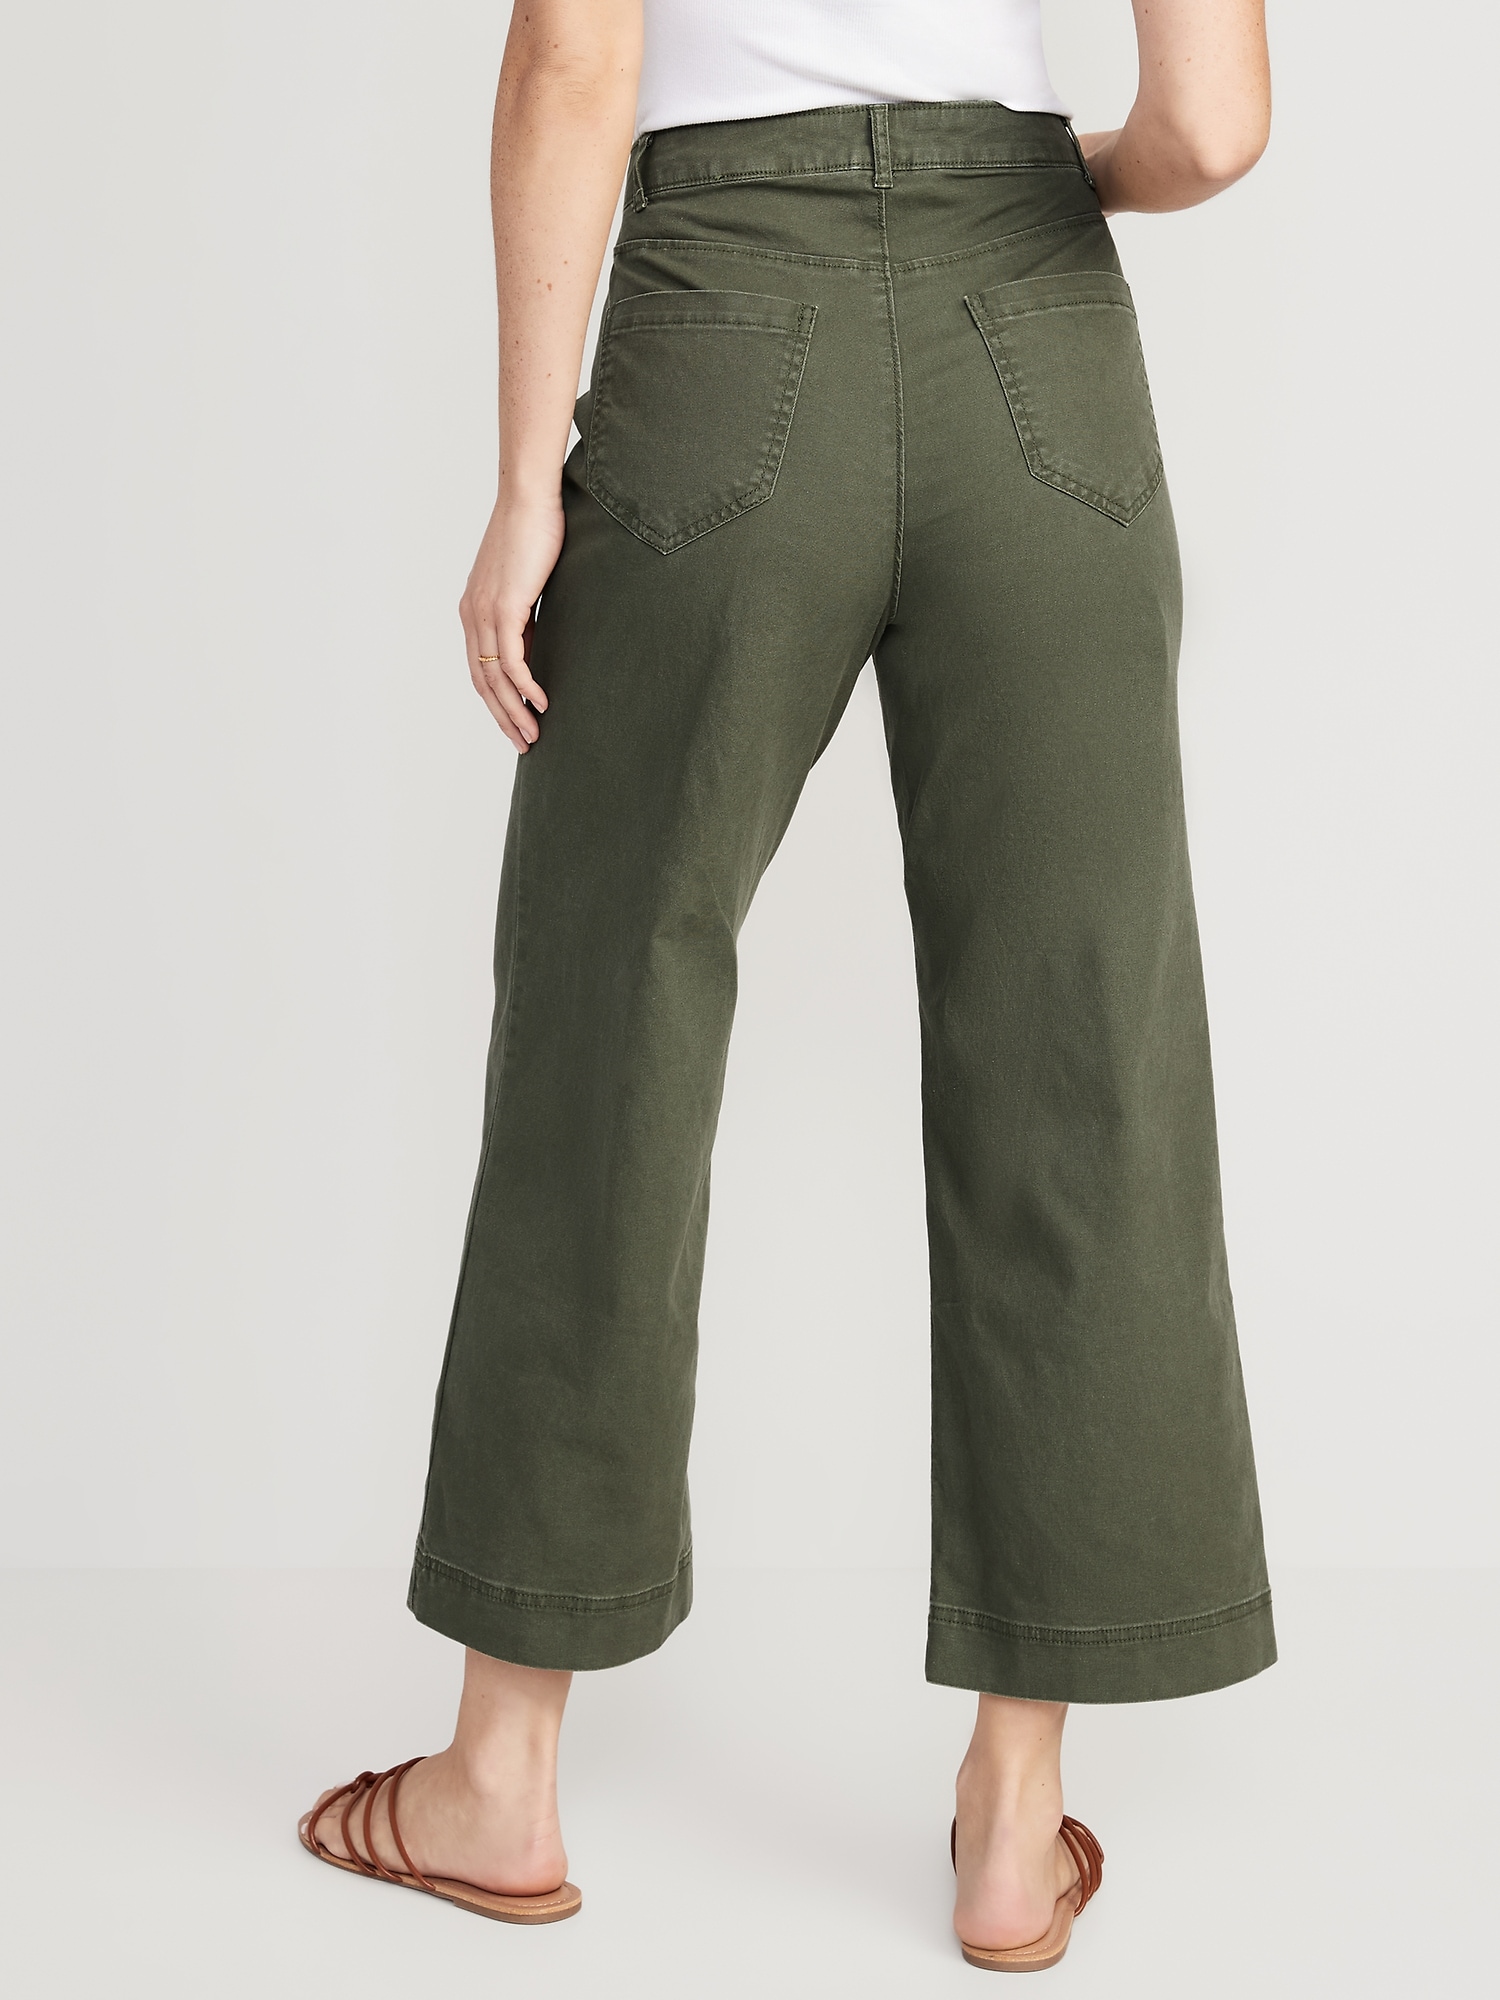 Womens Green Crops & Capris - Bottoms, Clothing